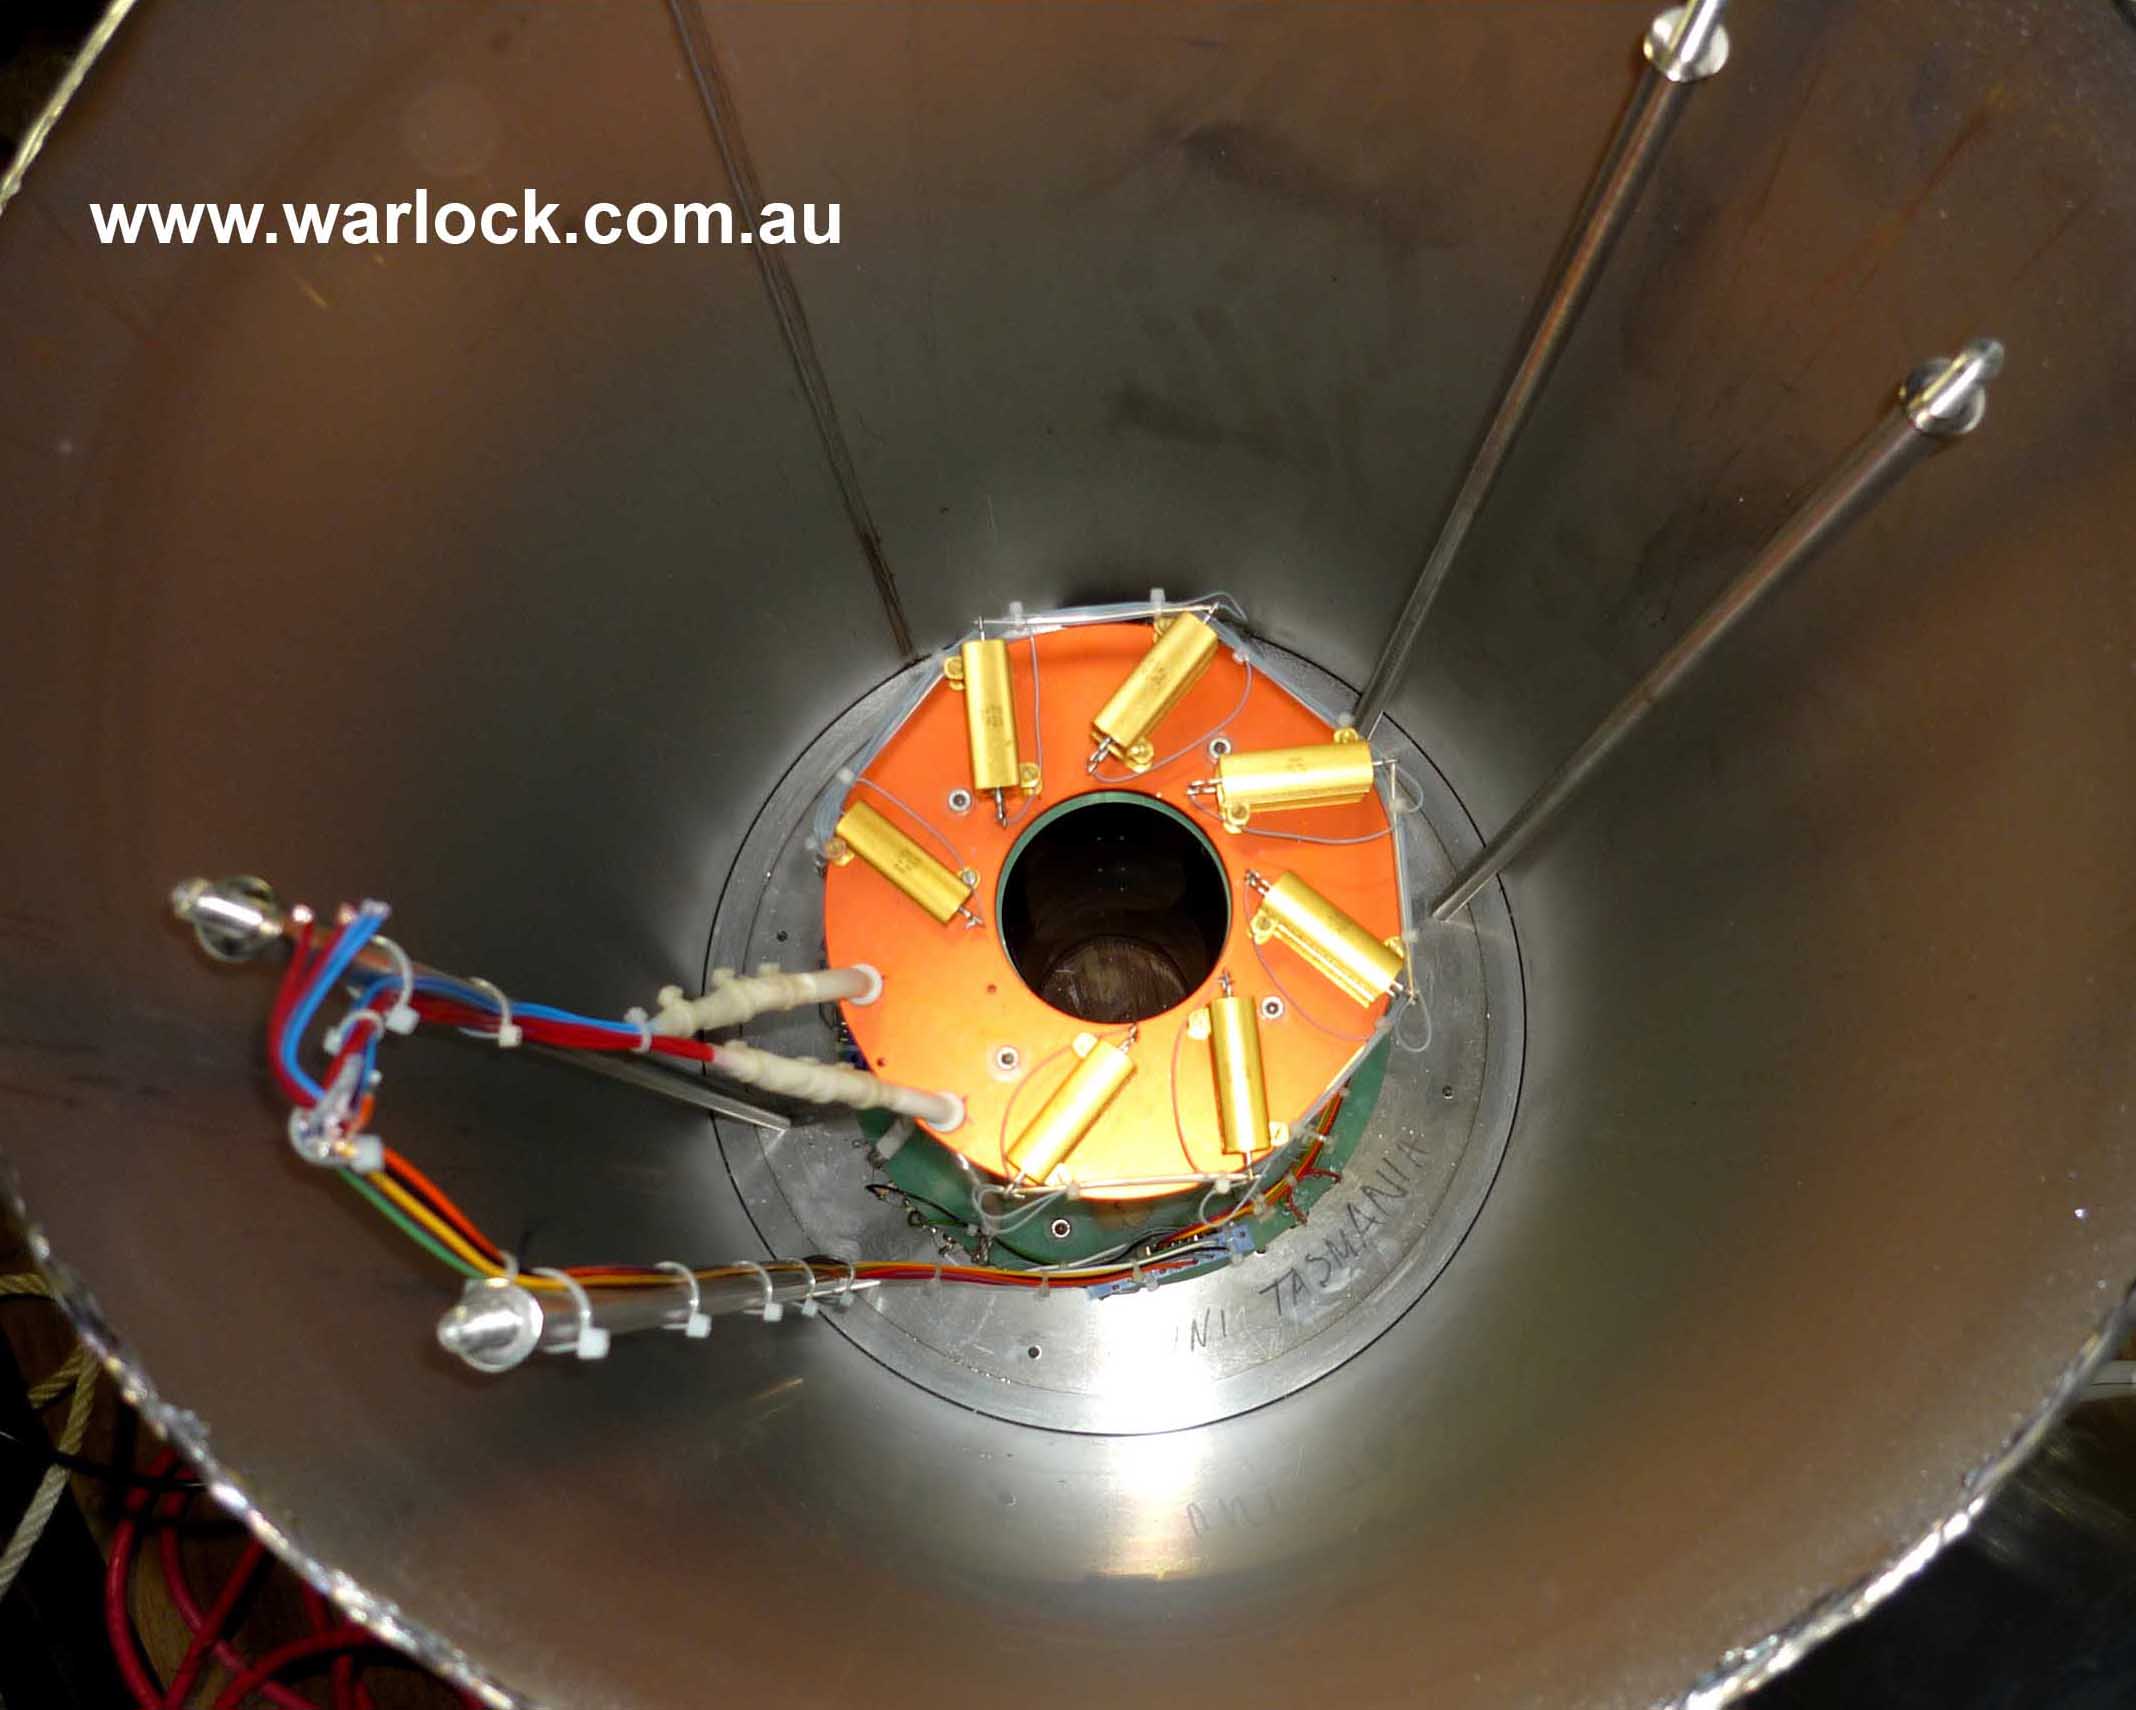 The superconducting magnet as viewed from the top of the helium vessel